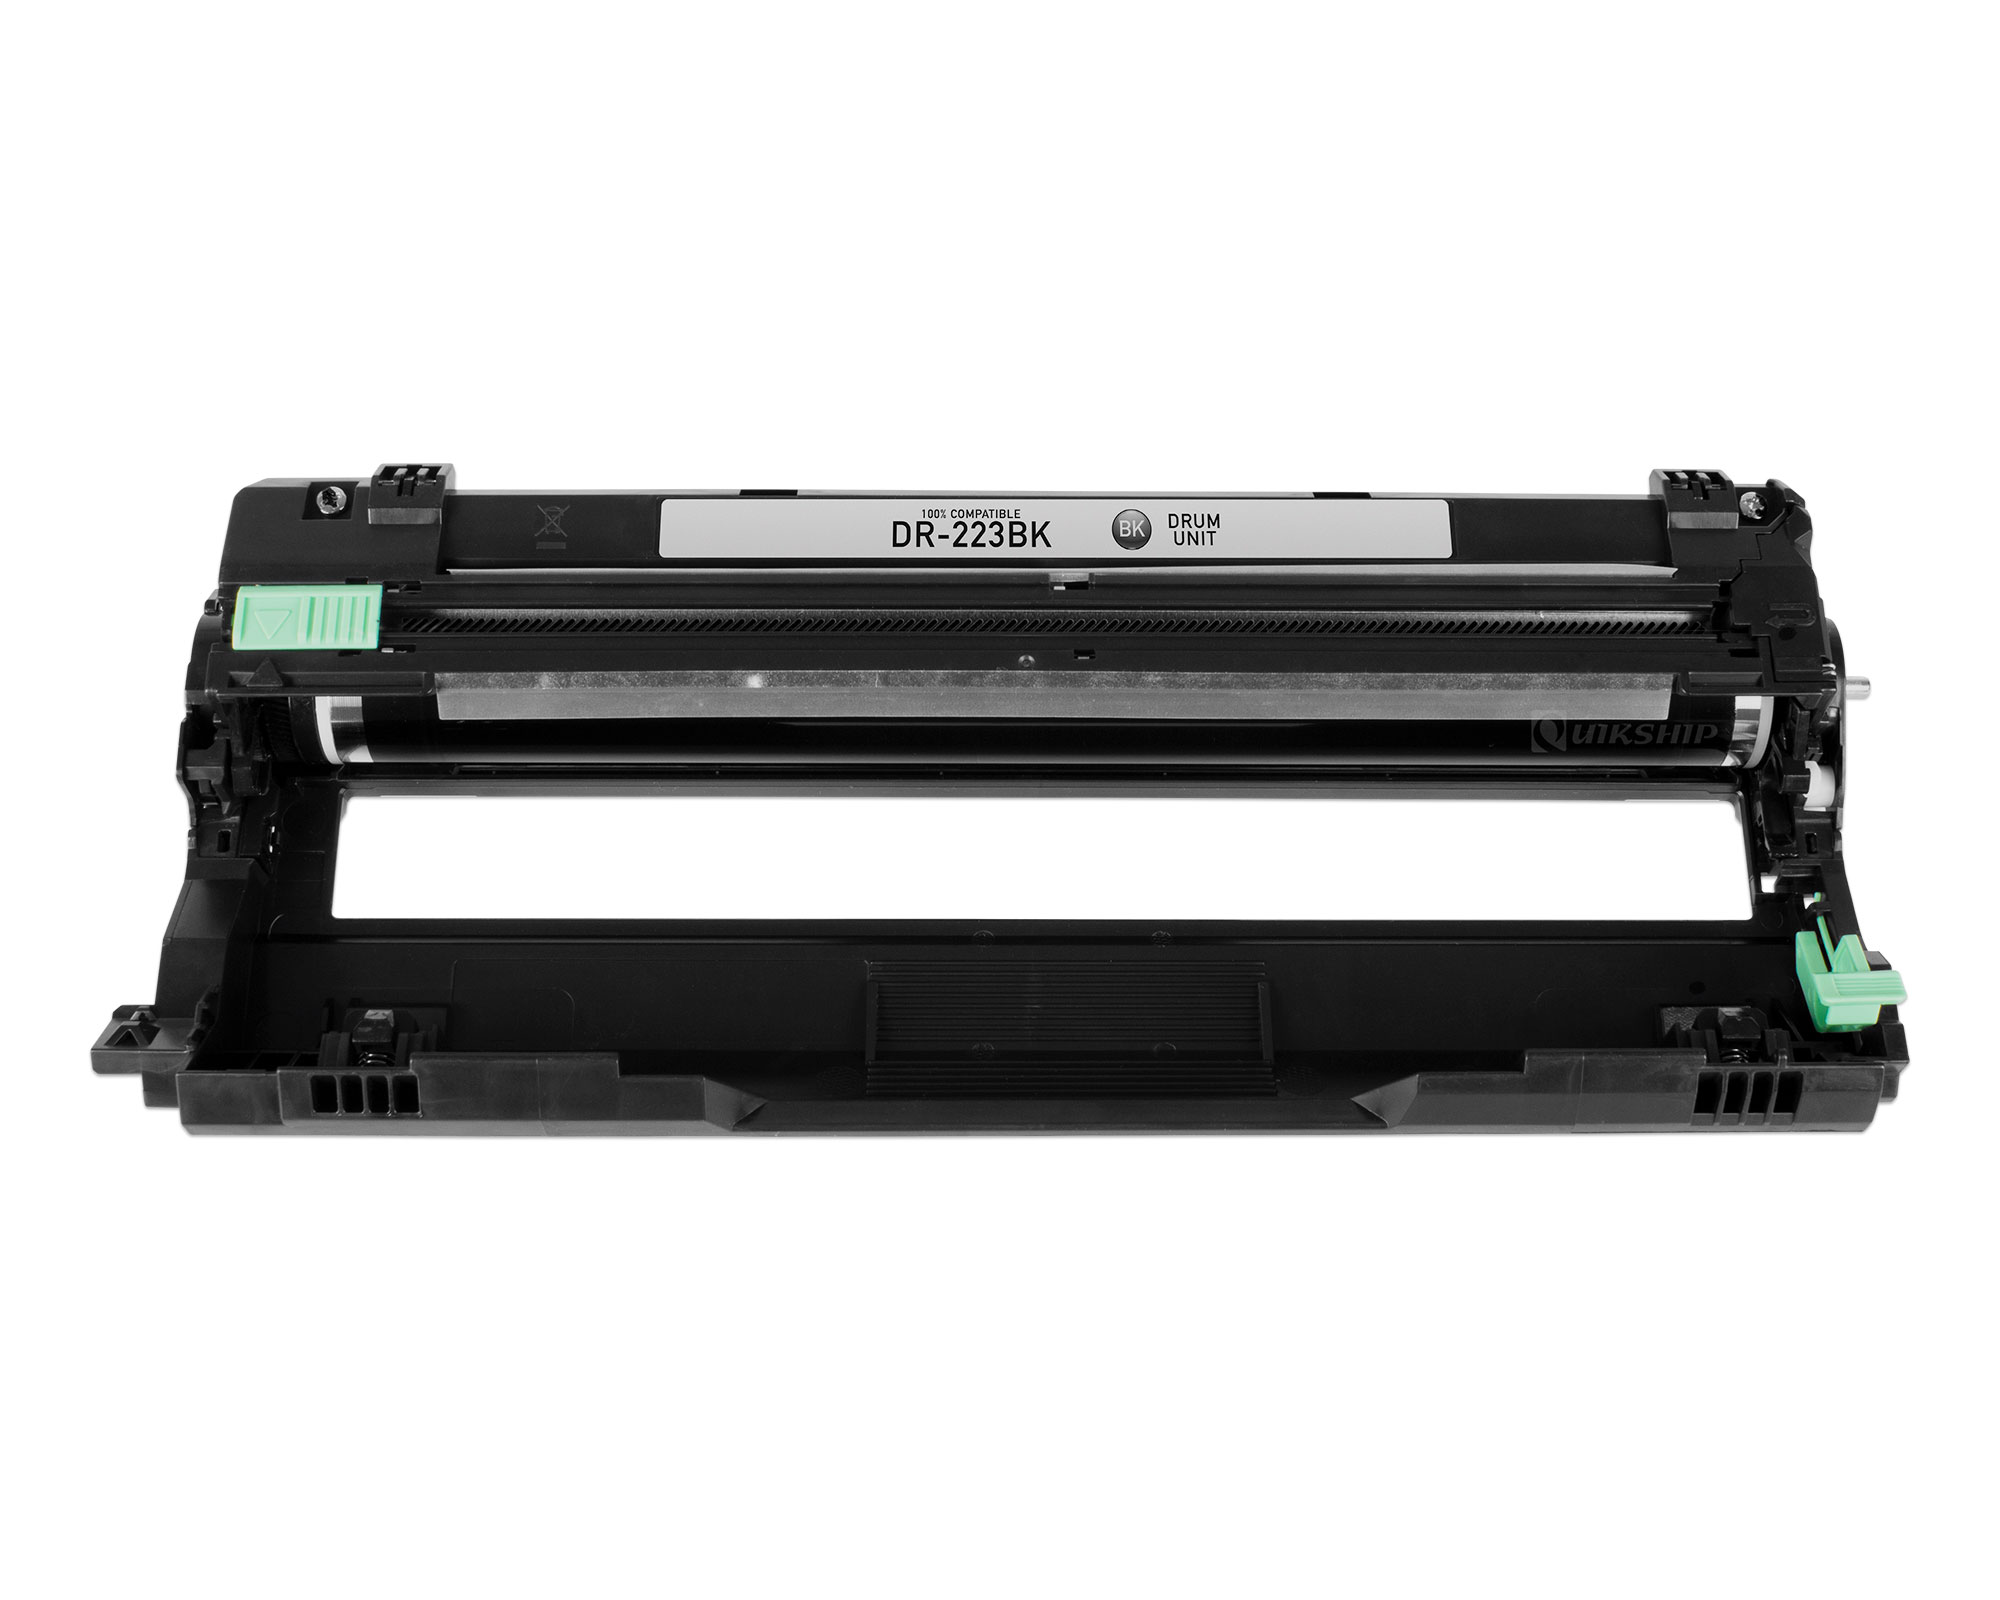 Compatible Black High Yield Toner Cartridge for use in Brother HL-L3270CDW